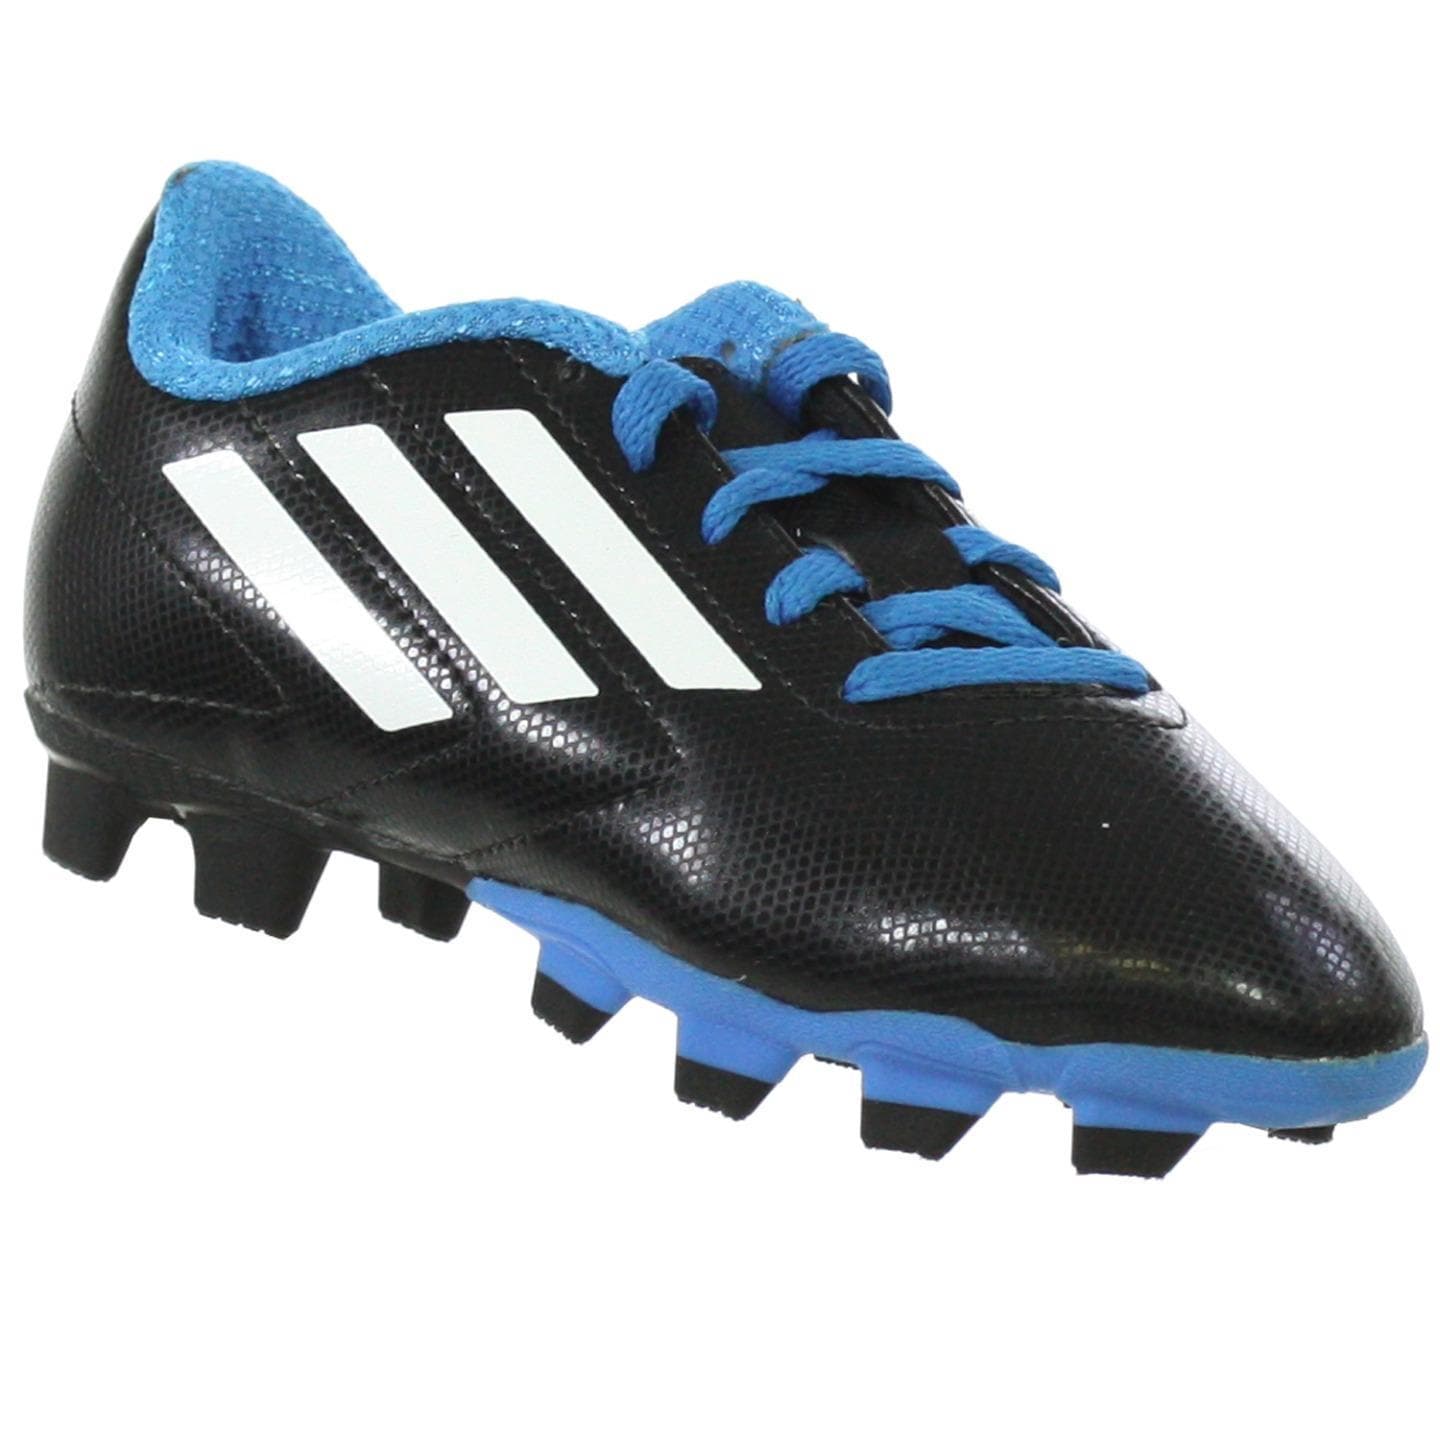 ADIDAS GOLETTO Youth Molded Soccer 